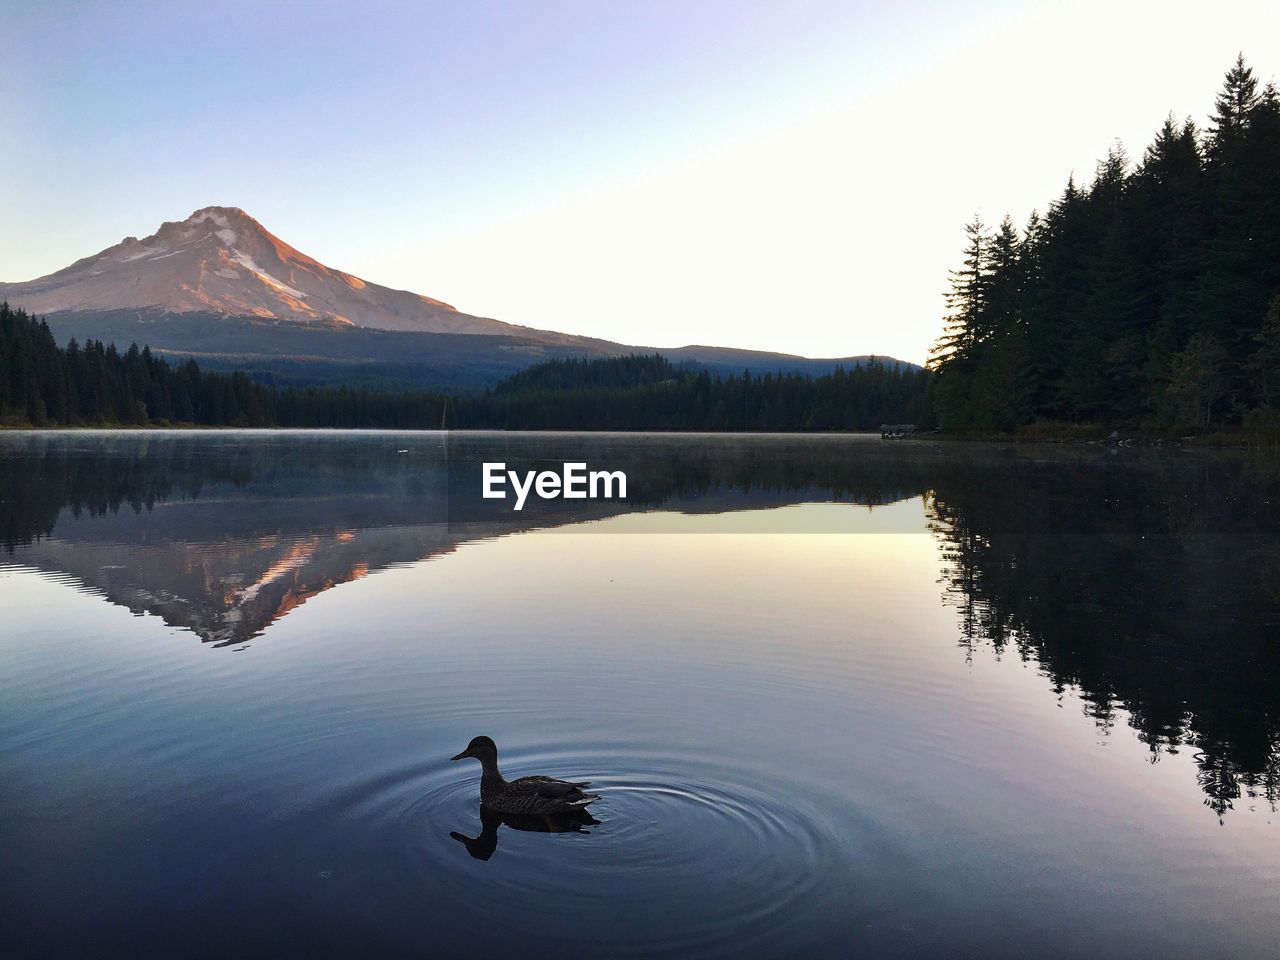 Scenic reflection of mountains in trillium lake